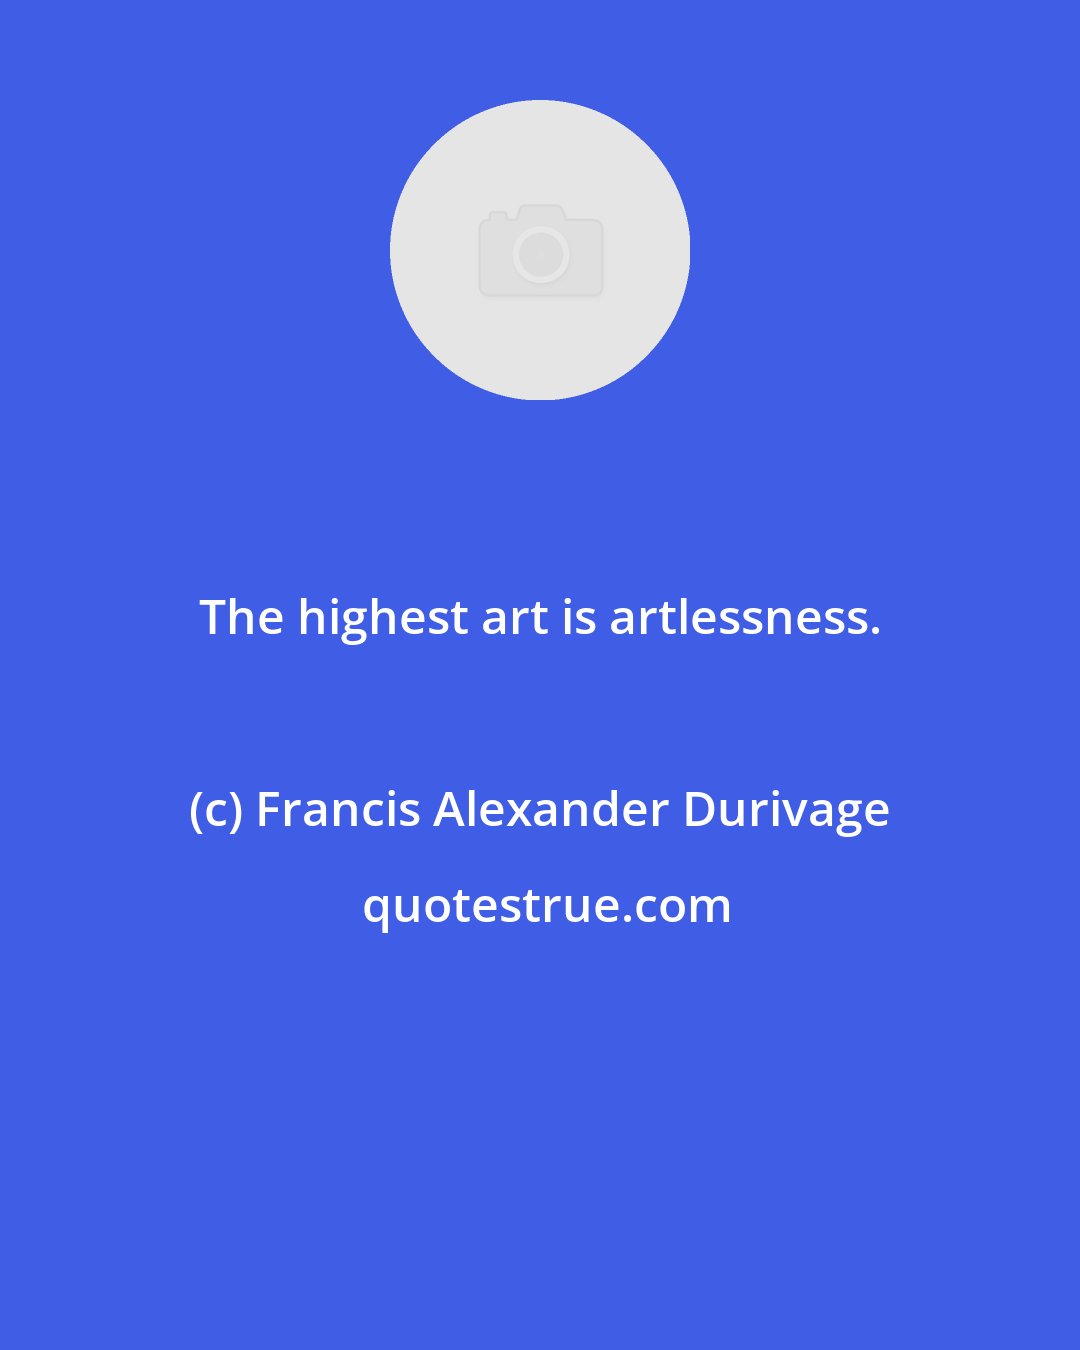 Francis Alexander Durivage: The highest art is artlessness.